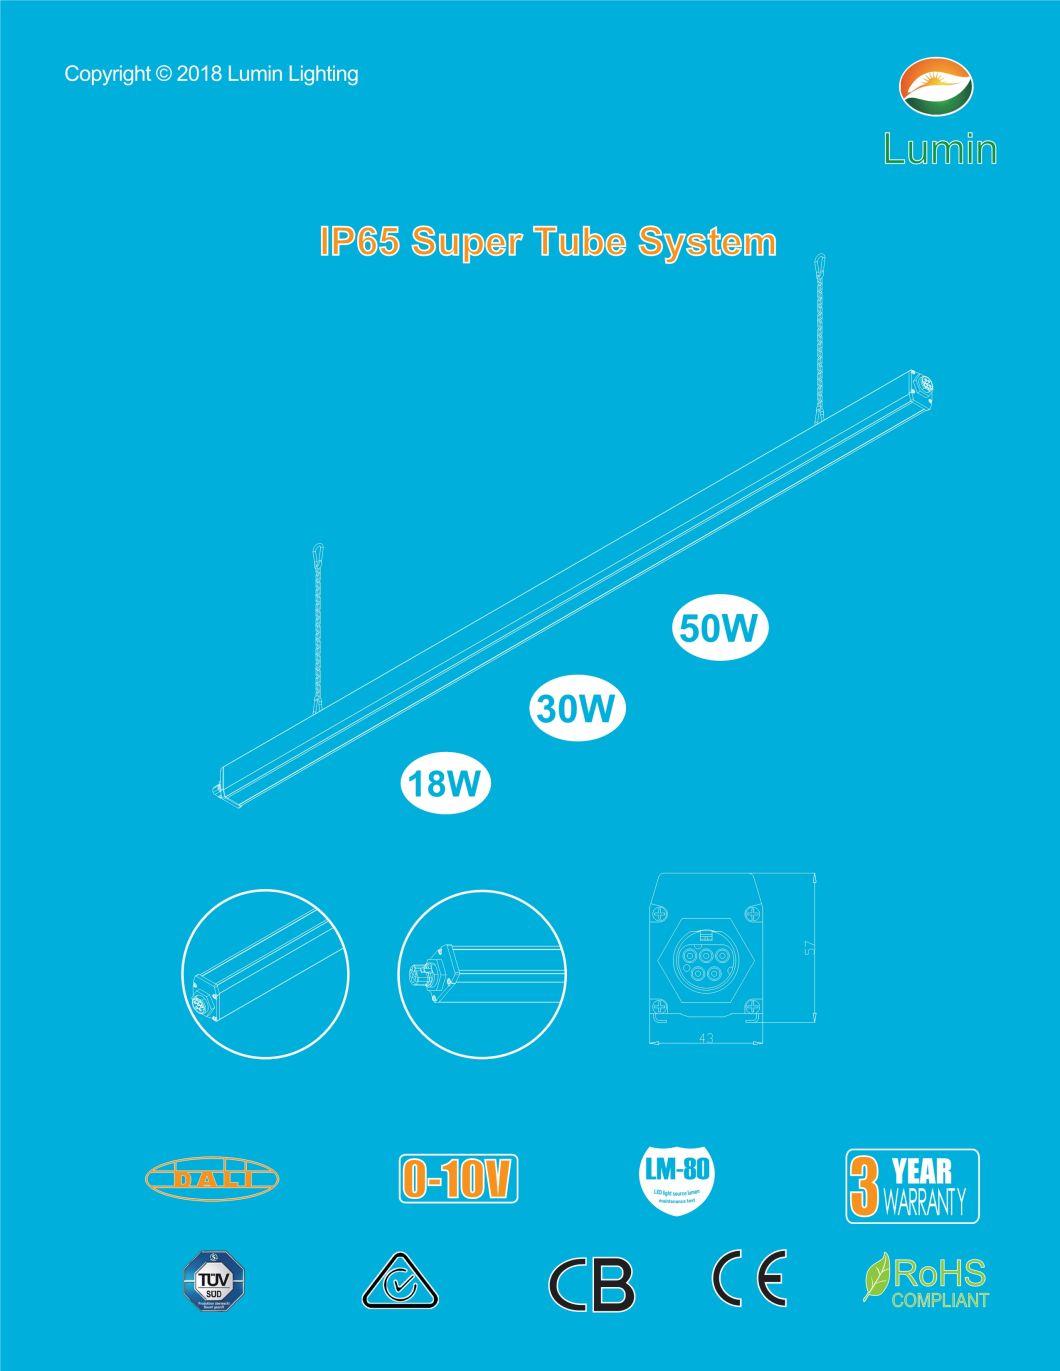 High Quality Surface Mounted LED Linear Light Super Tube System with Ce &RoHS Approvals